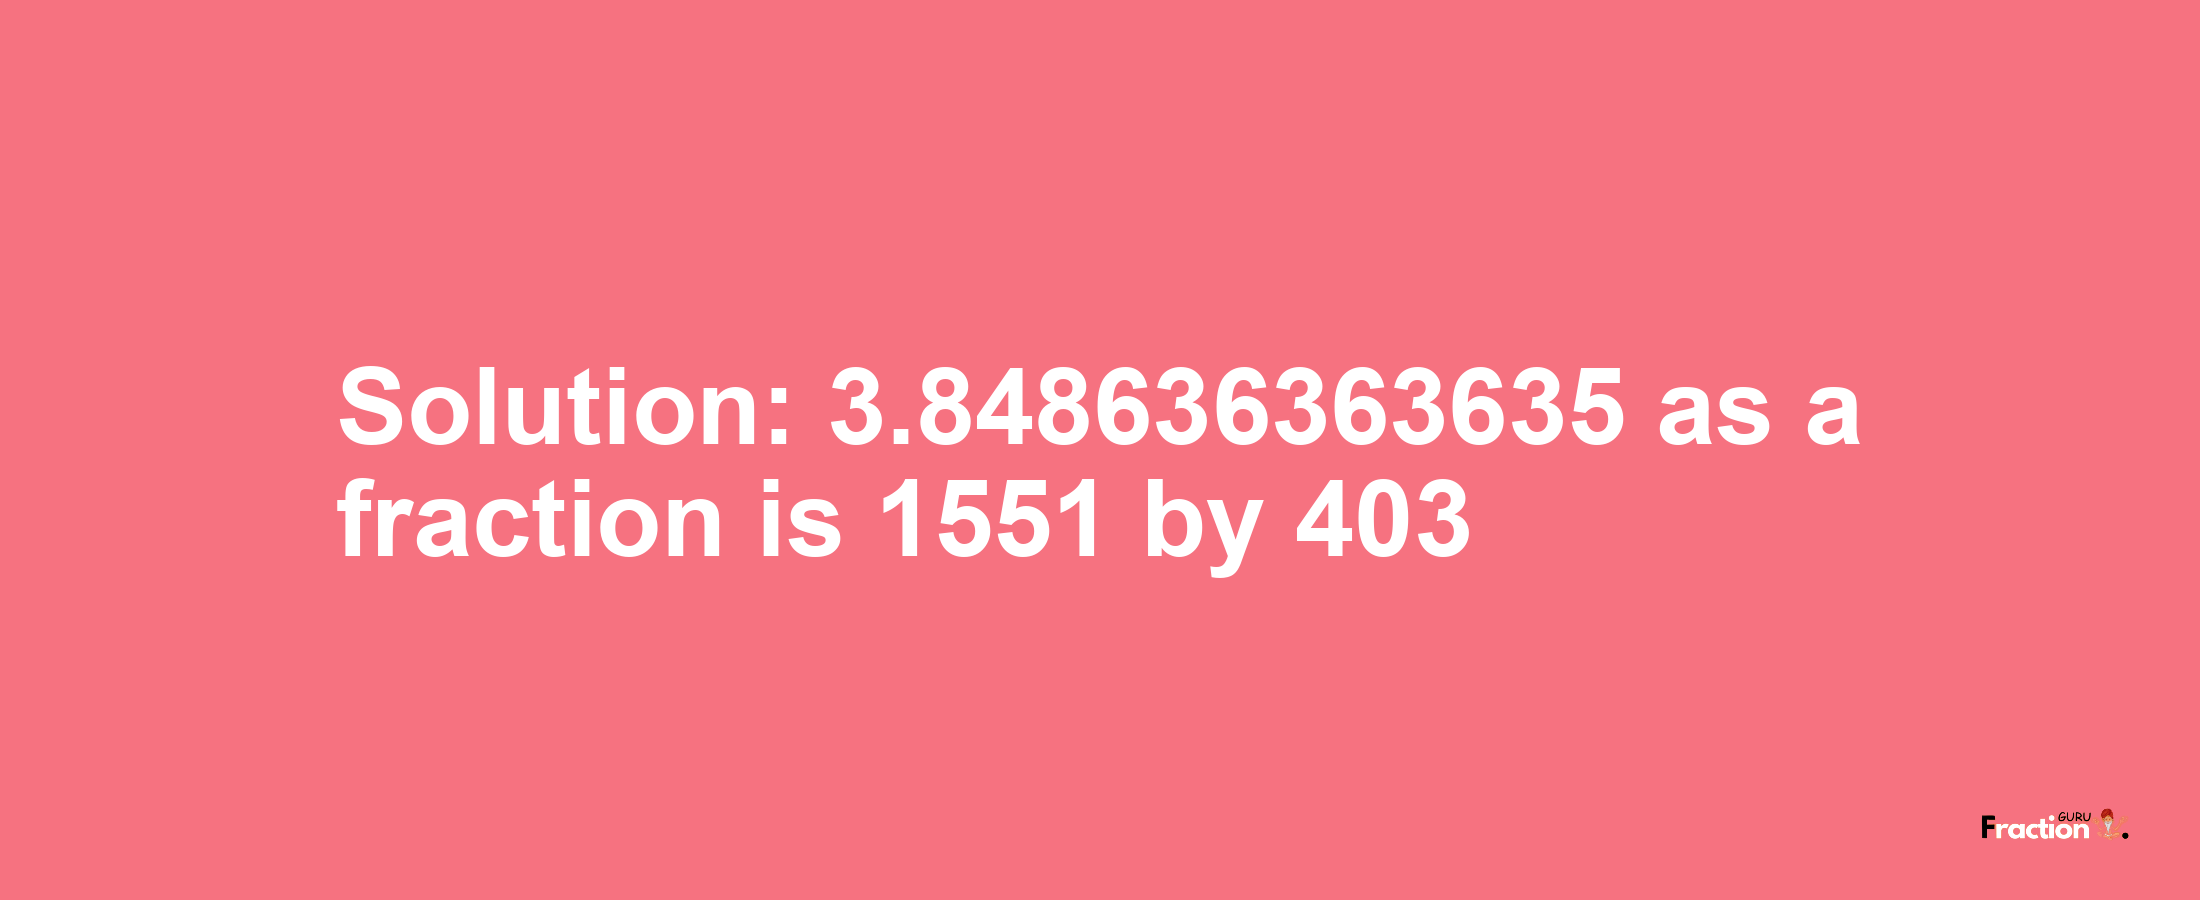 Solution:3.848636363635 as a fraction is 1551/403